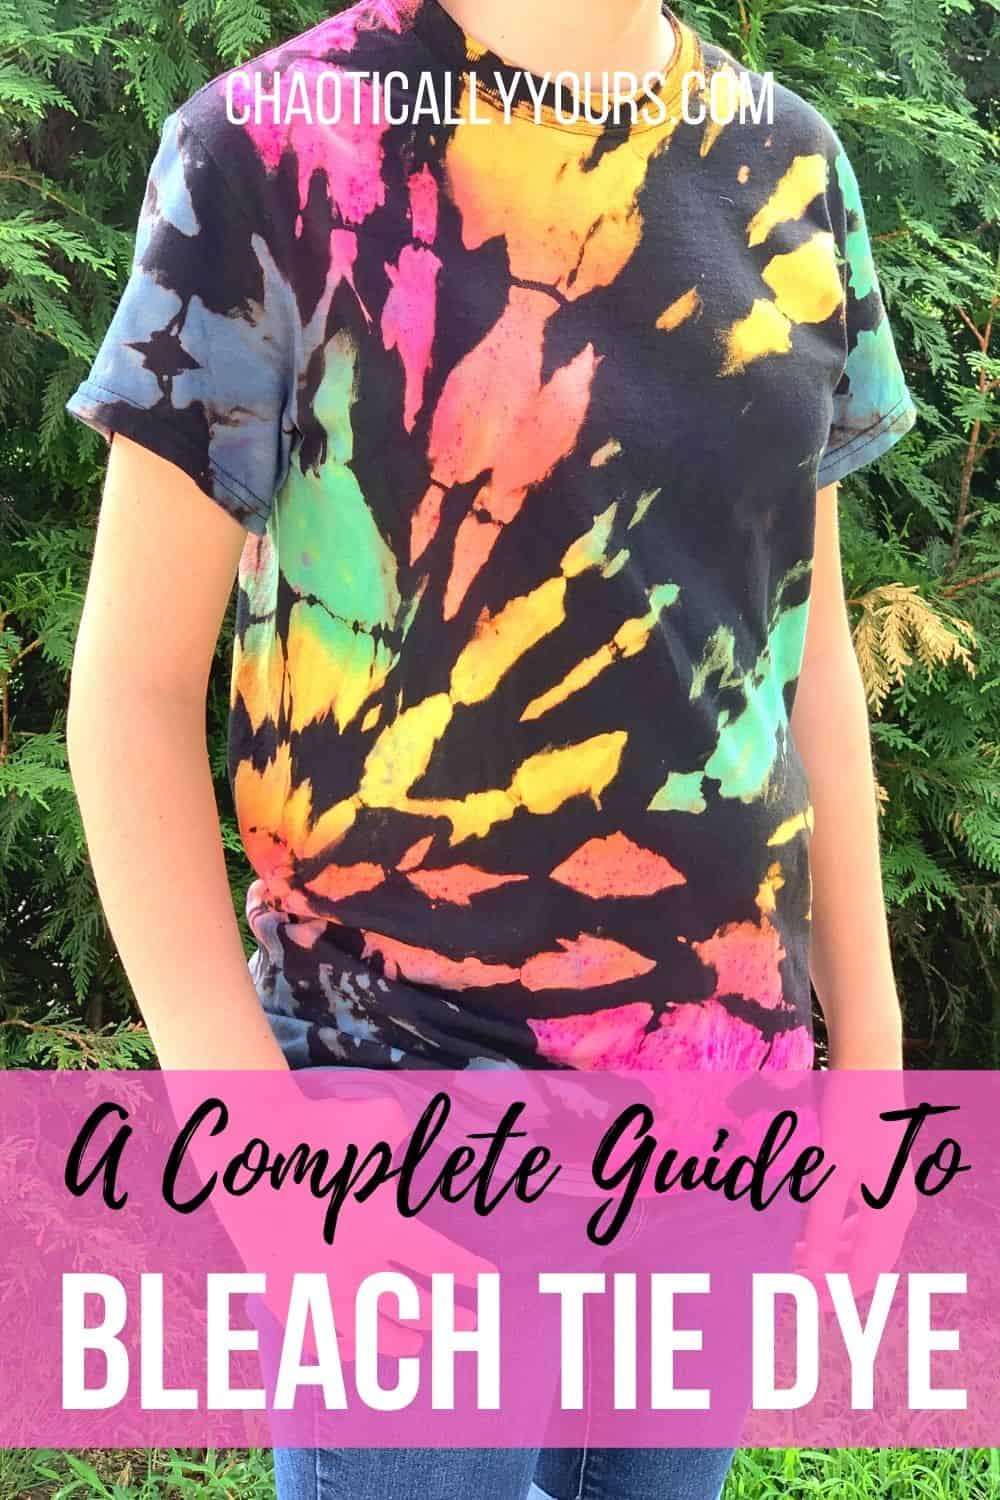 Pre-Treat Stains and Spots on Tie Dye Shirts